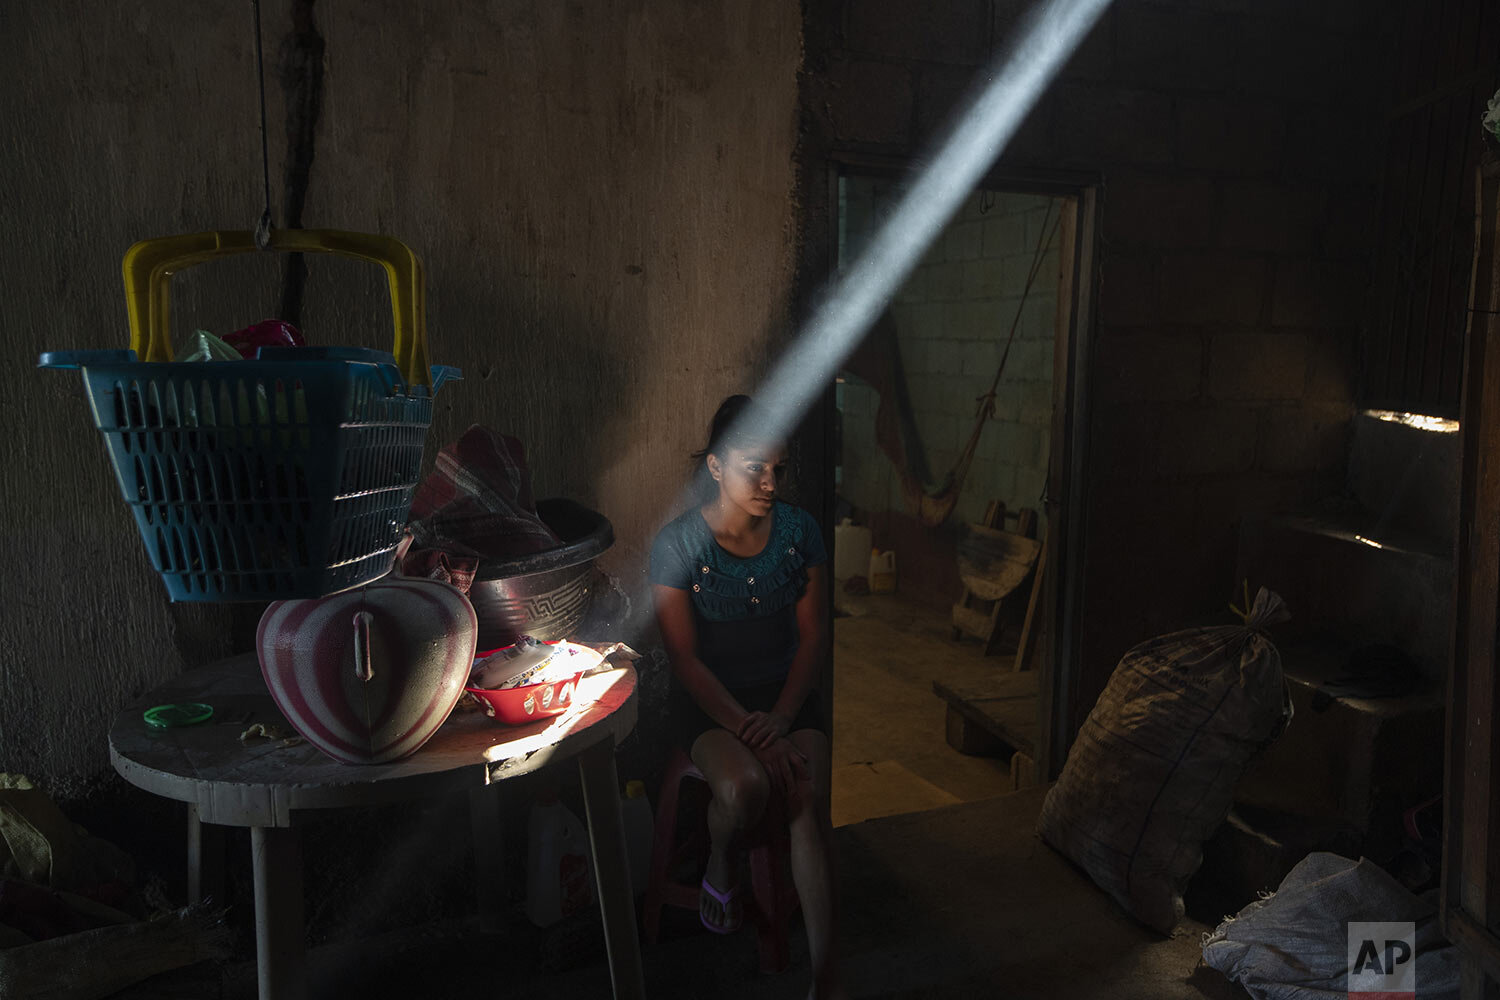  Delmi Jeronimo sits in her aunt’s kitchen before breakfast in Tizamarte, Guatemala, Dec. 11, 2020. In the dry winter months, the house is dark and cold seeps through the corrugated tin roof. In the rainy season, it is hot and stifling. (AP Photo/Moi